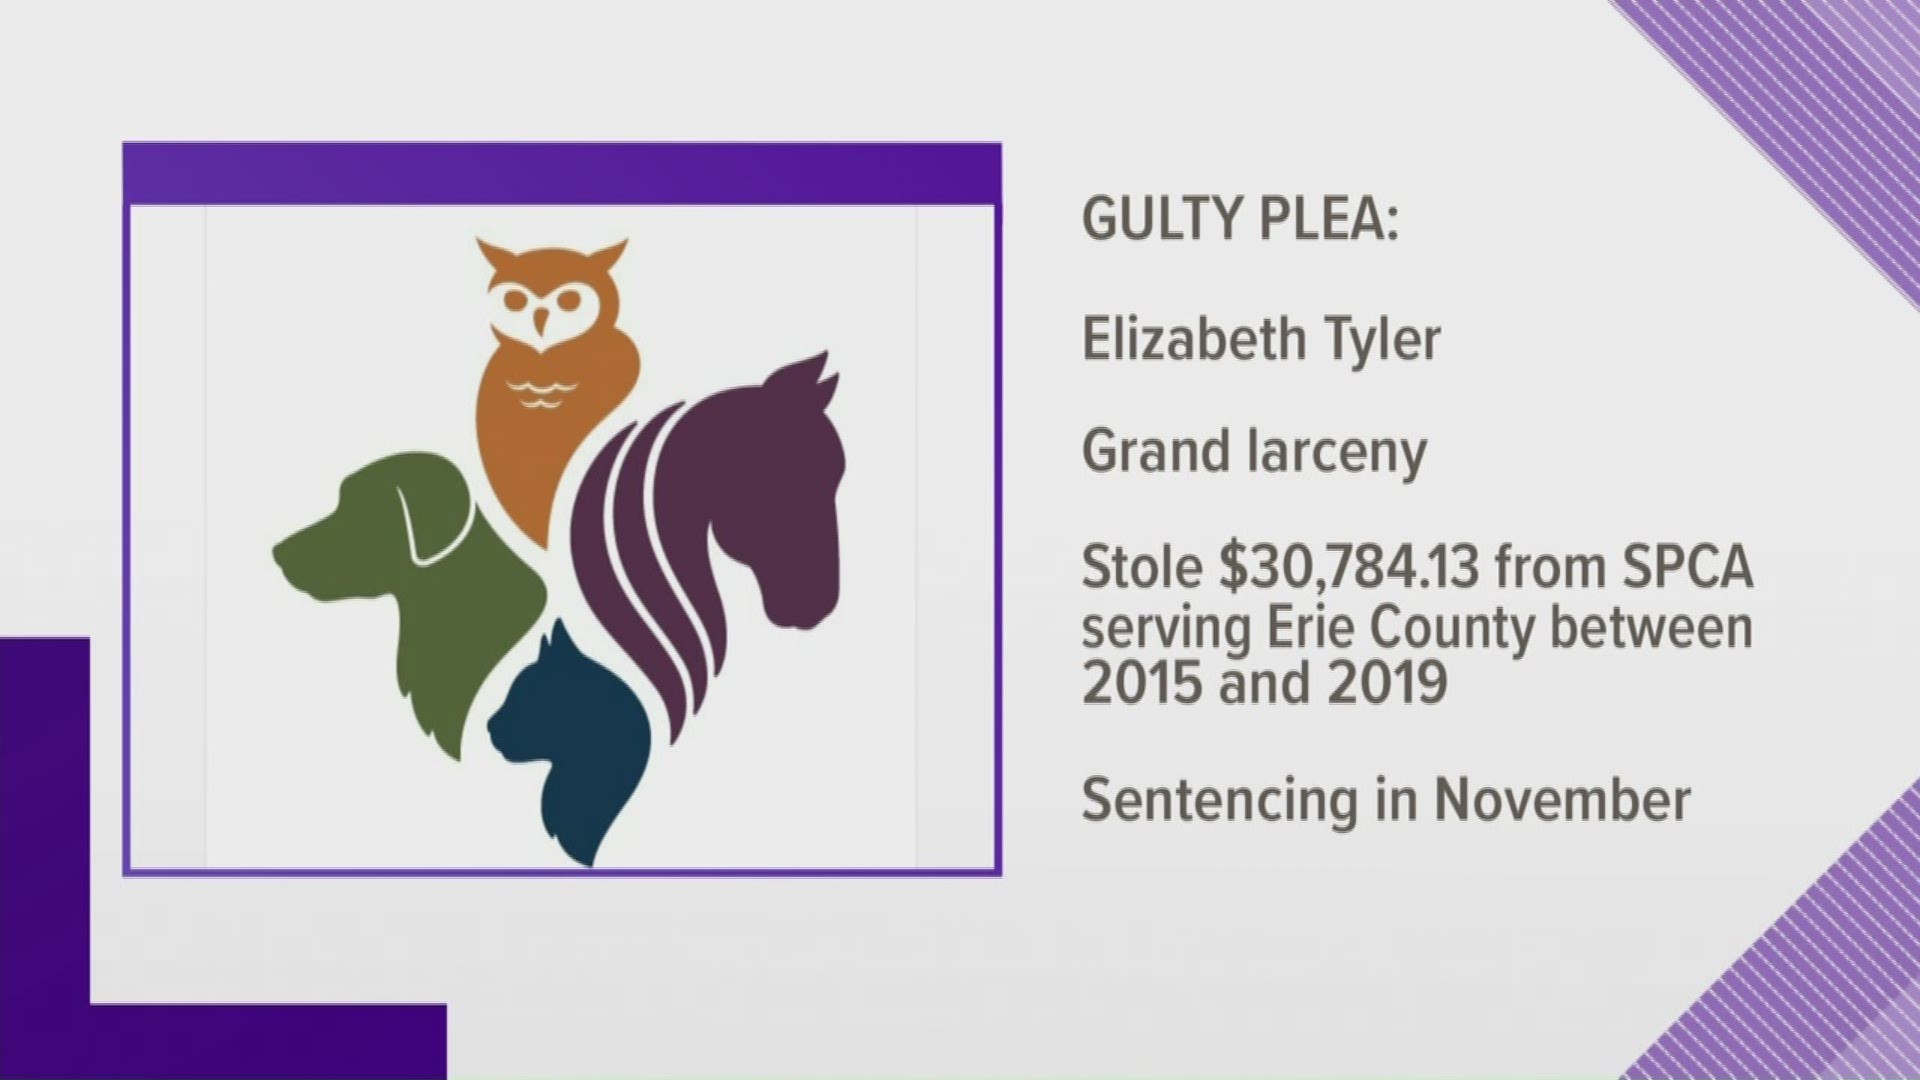 Elizabeth Tyler pleaded guilty this morning to grand larceny...